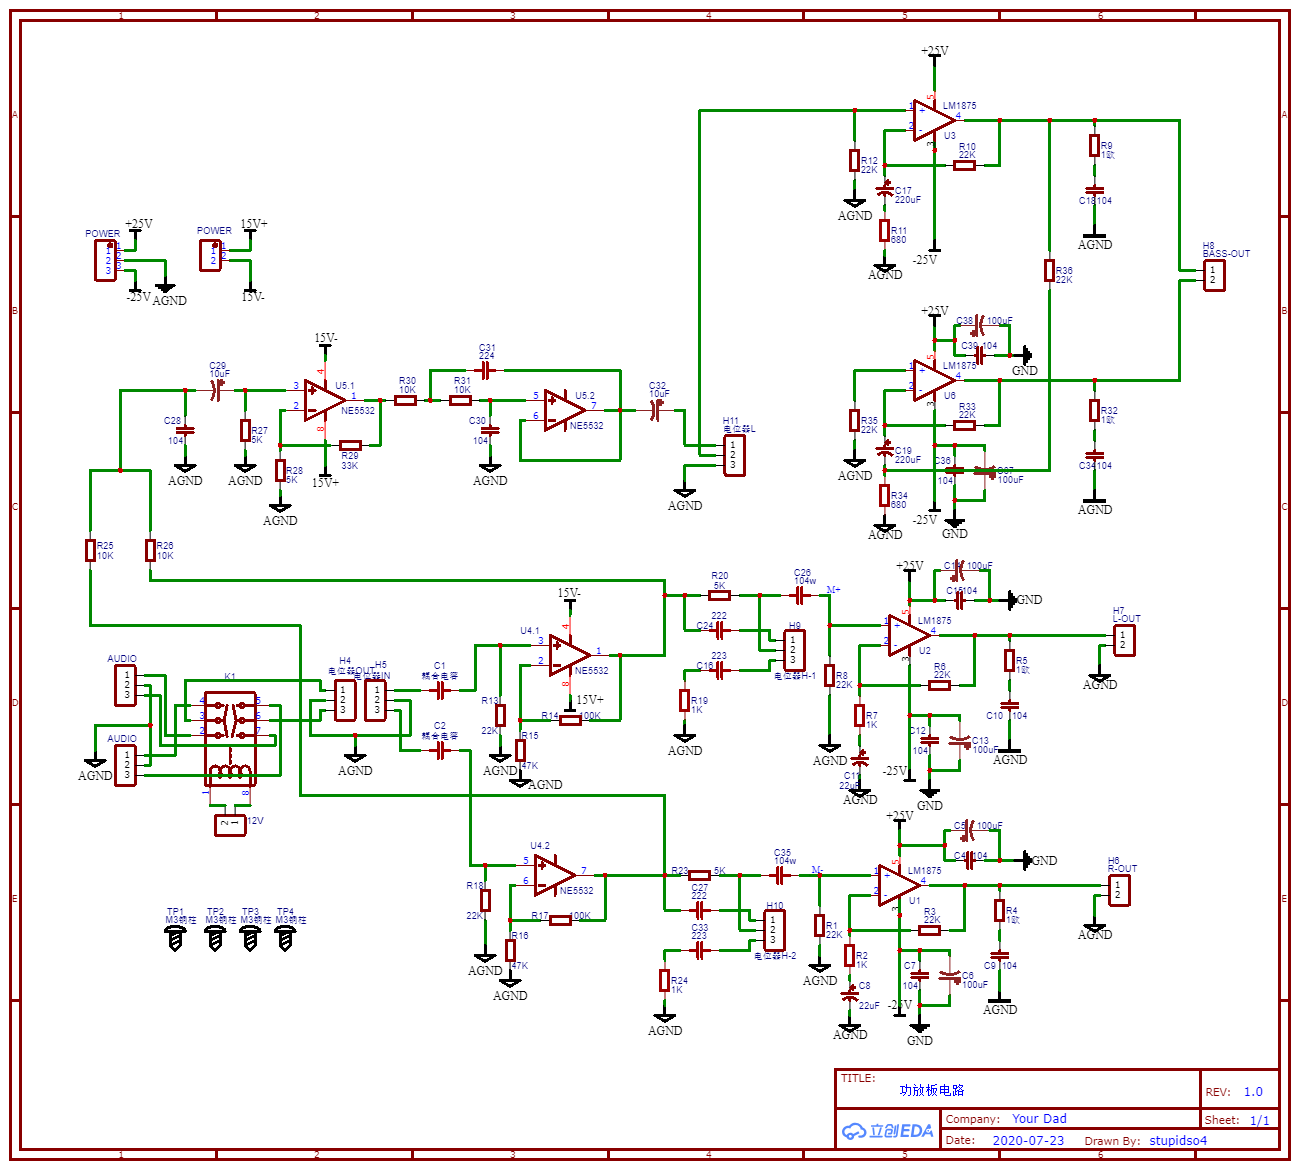 Schematic_lm1875Ű_2020-08-26_17-16-18.png